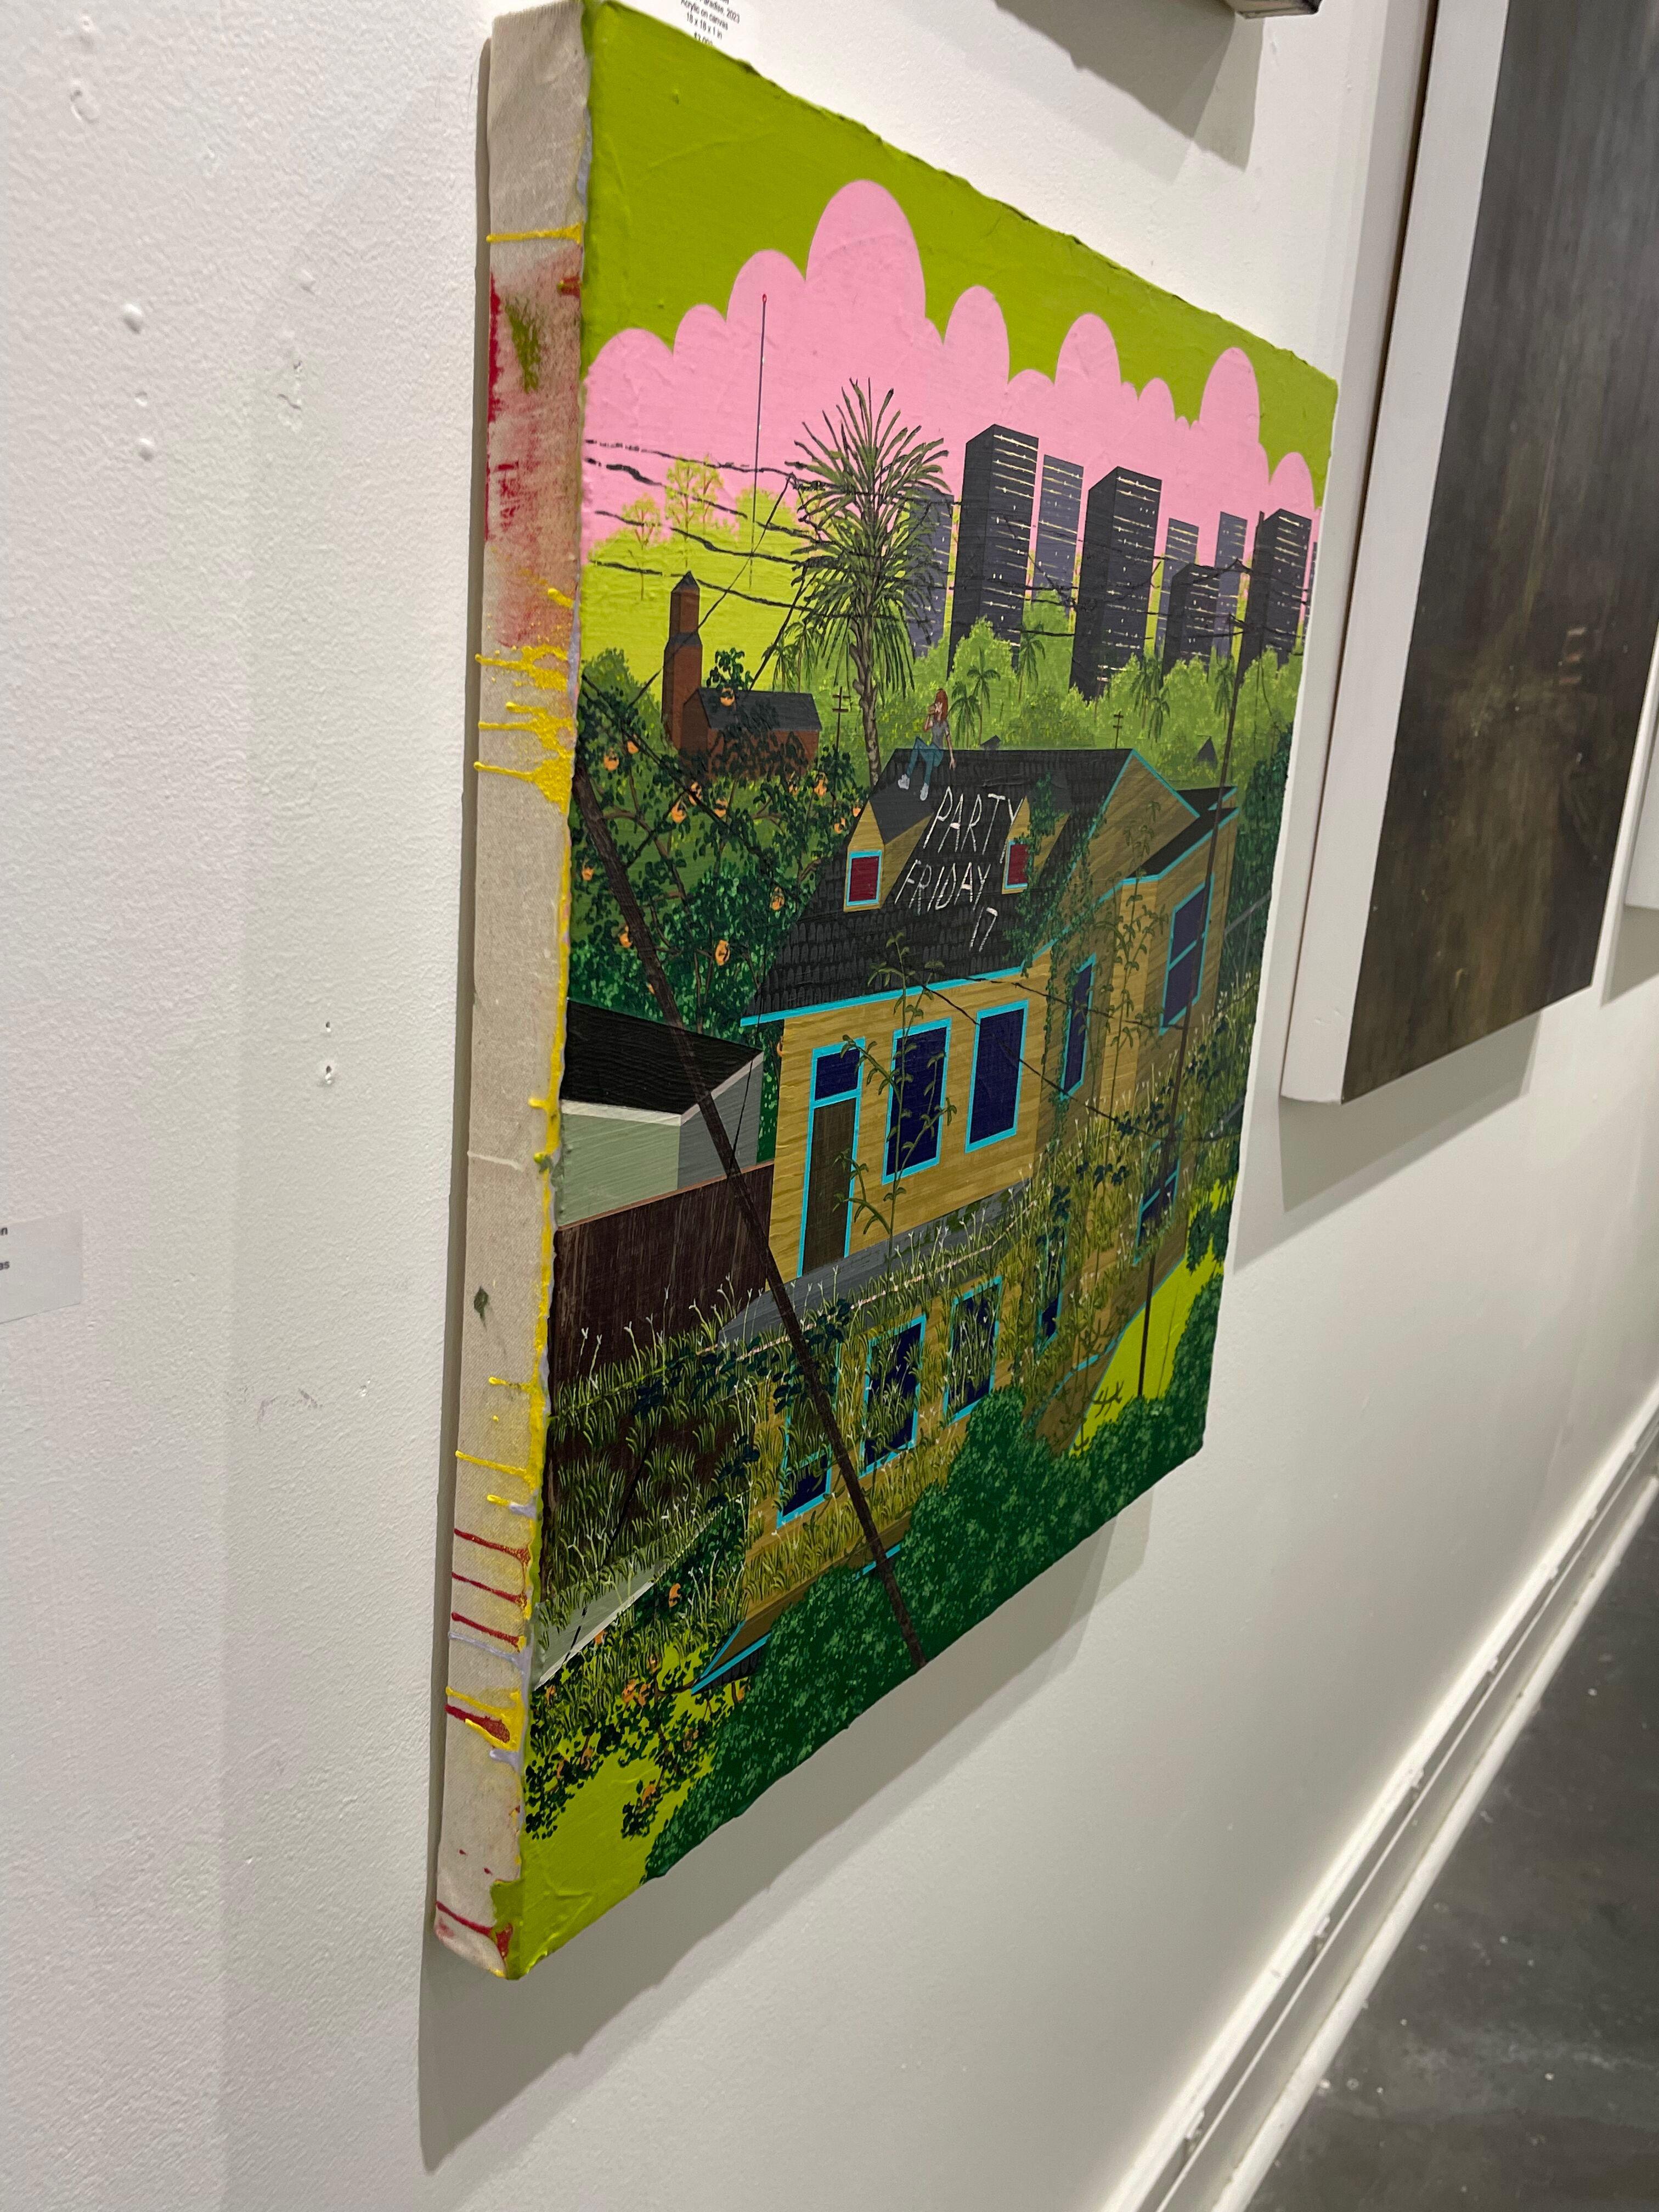 Thomas Deaton (b. 1988), a contemporary artist with a background in printmaking and drawing, explores hidden stories of beauty set against the backdrop of forgotten neighborhoods in his recent body of work. Drawing inspiration from his personal